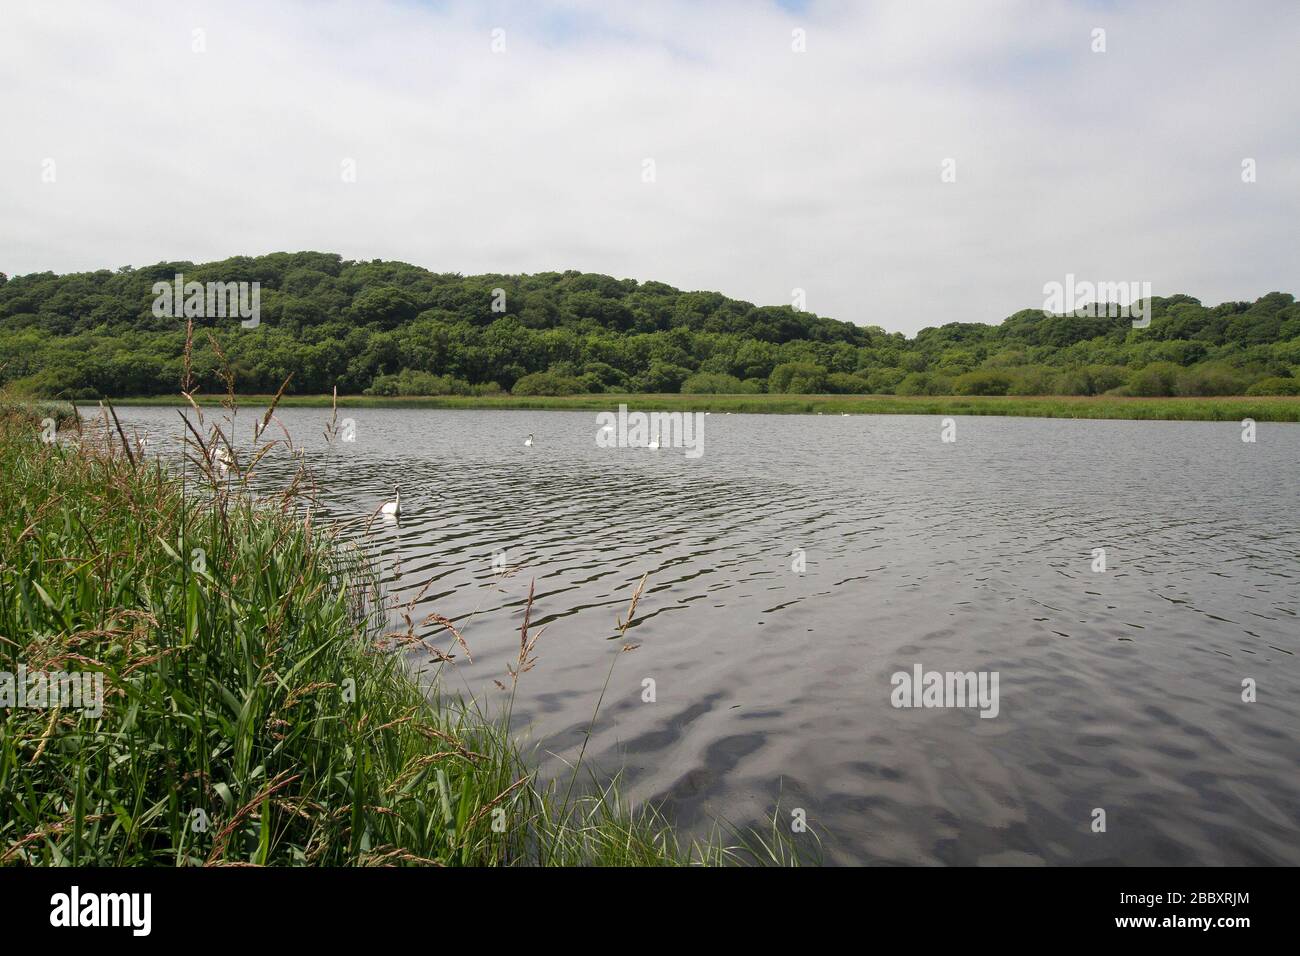 Old riverside forest, and swans on a river in Ireland, the River Quoile, a Game of Thrones location in Northern Ireland, in County Down. Stock Photo